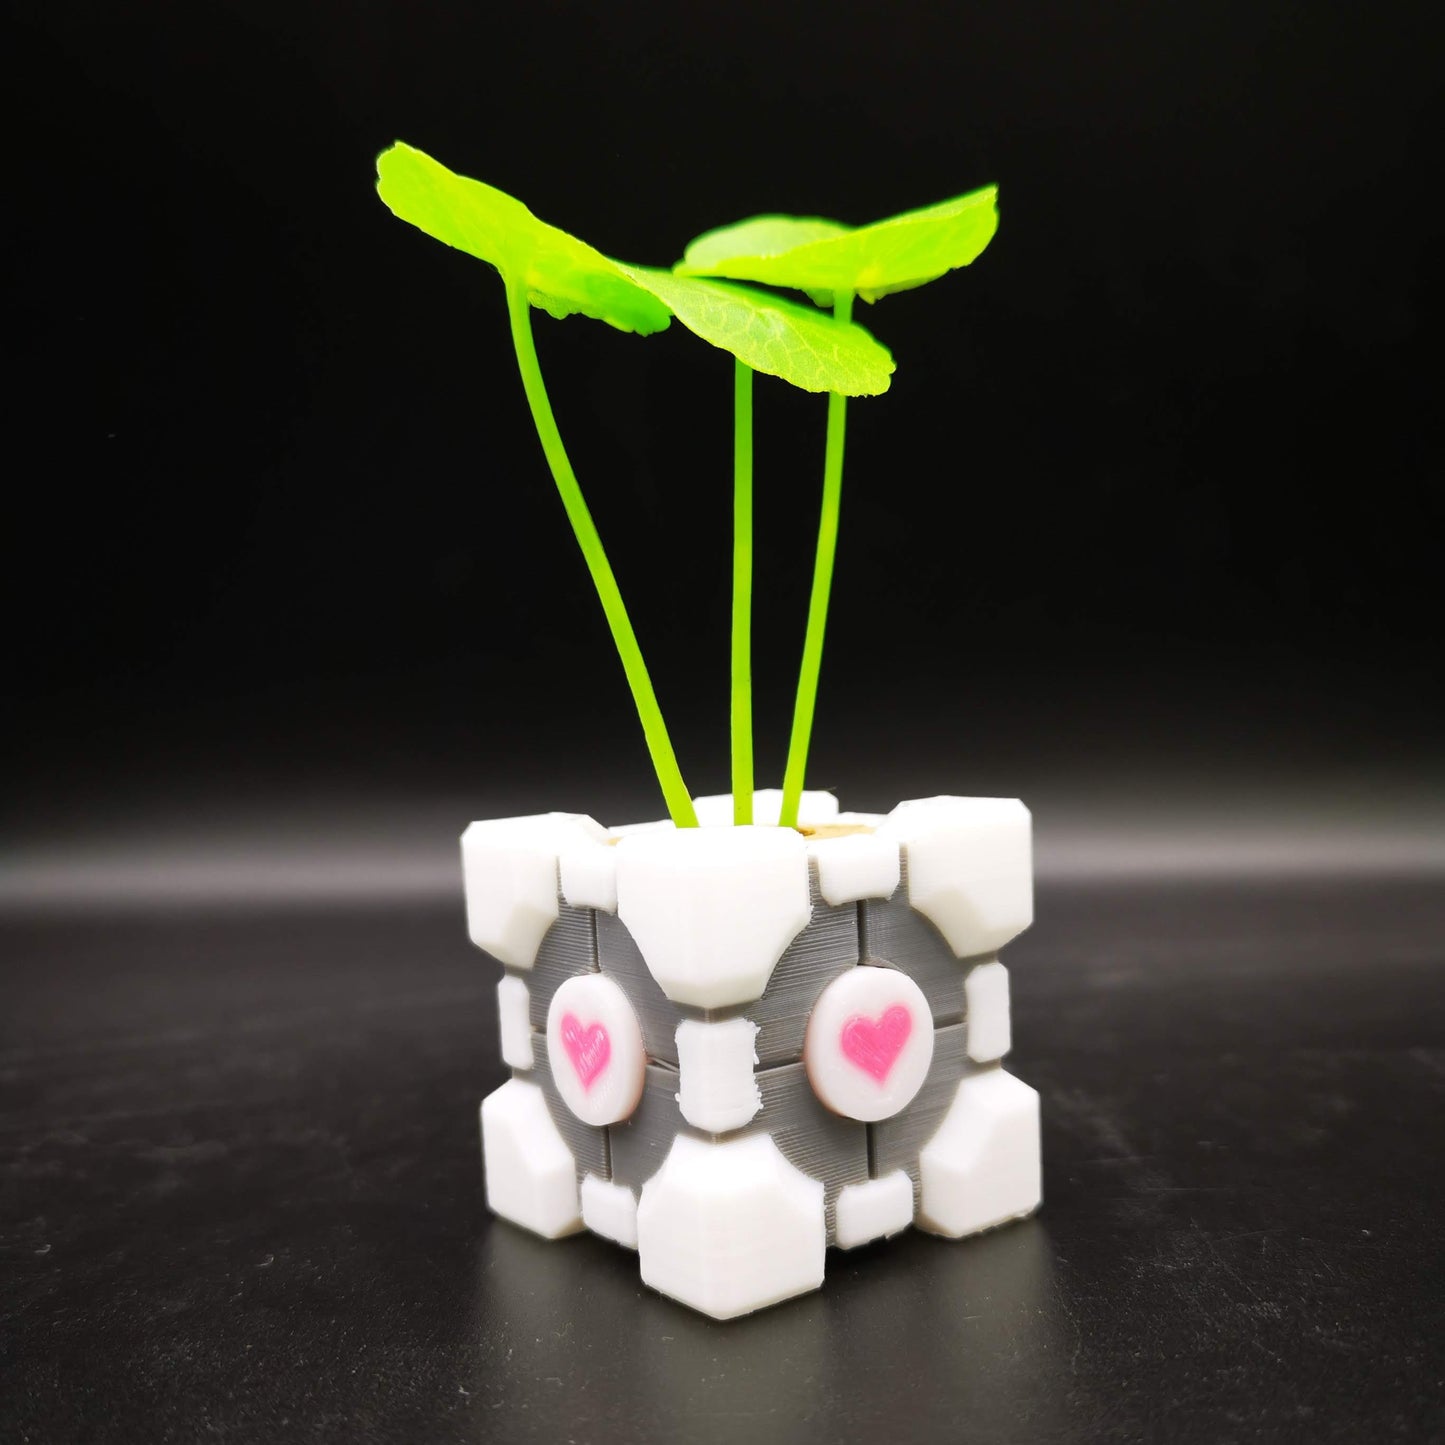 Small Companion Cube Portal planter with plant from angle with pink hearts